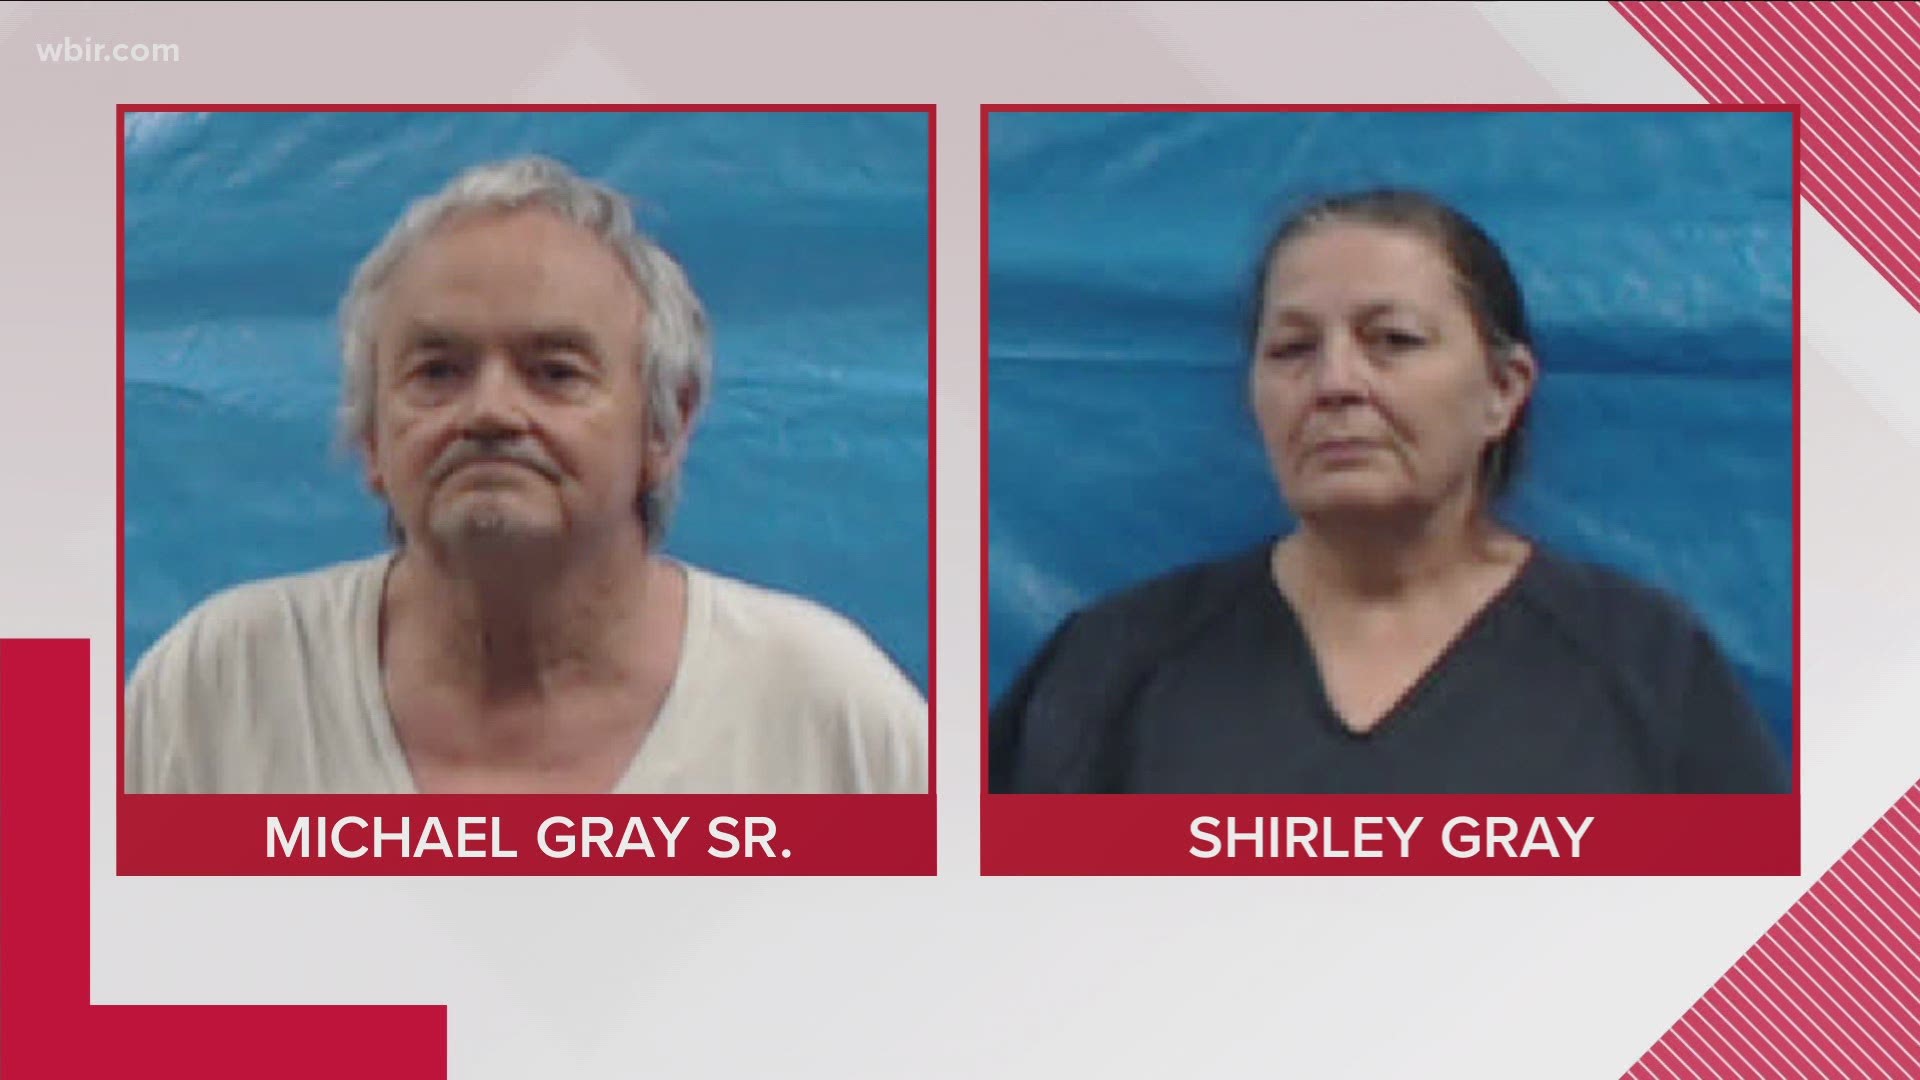 Michael & Shirley Gray are charged with years of abuse. The remains of two dead children have now been found on properties they lived on.